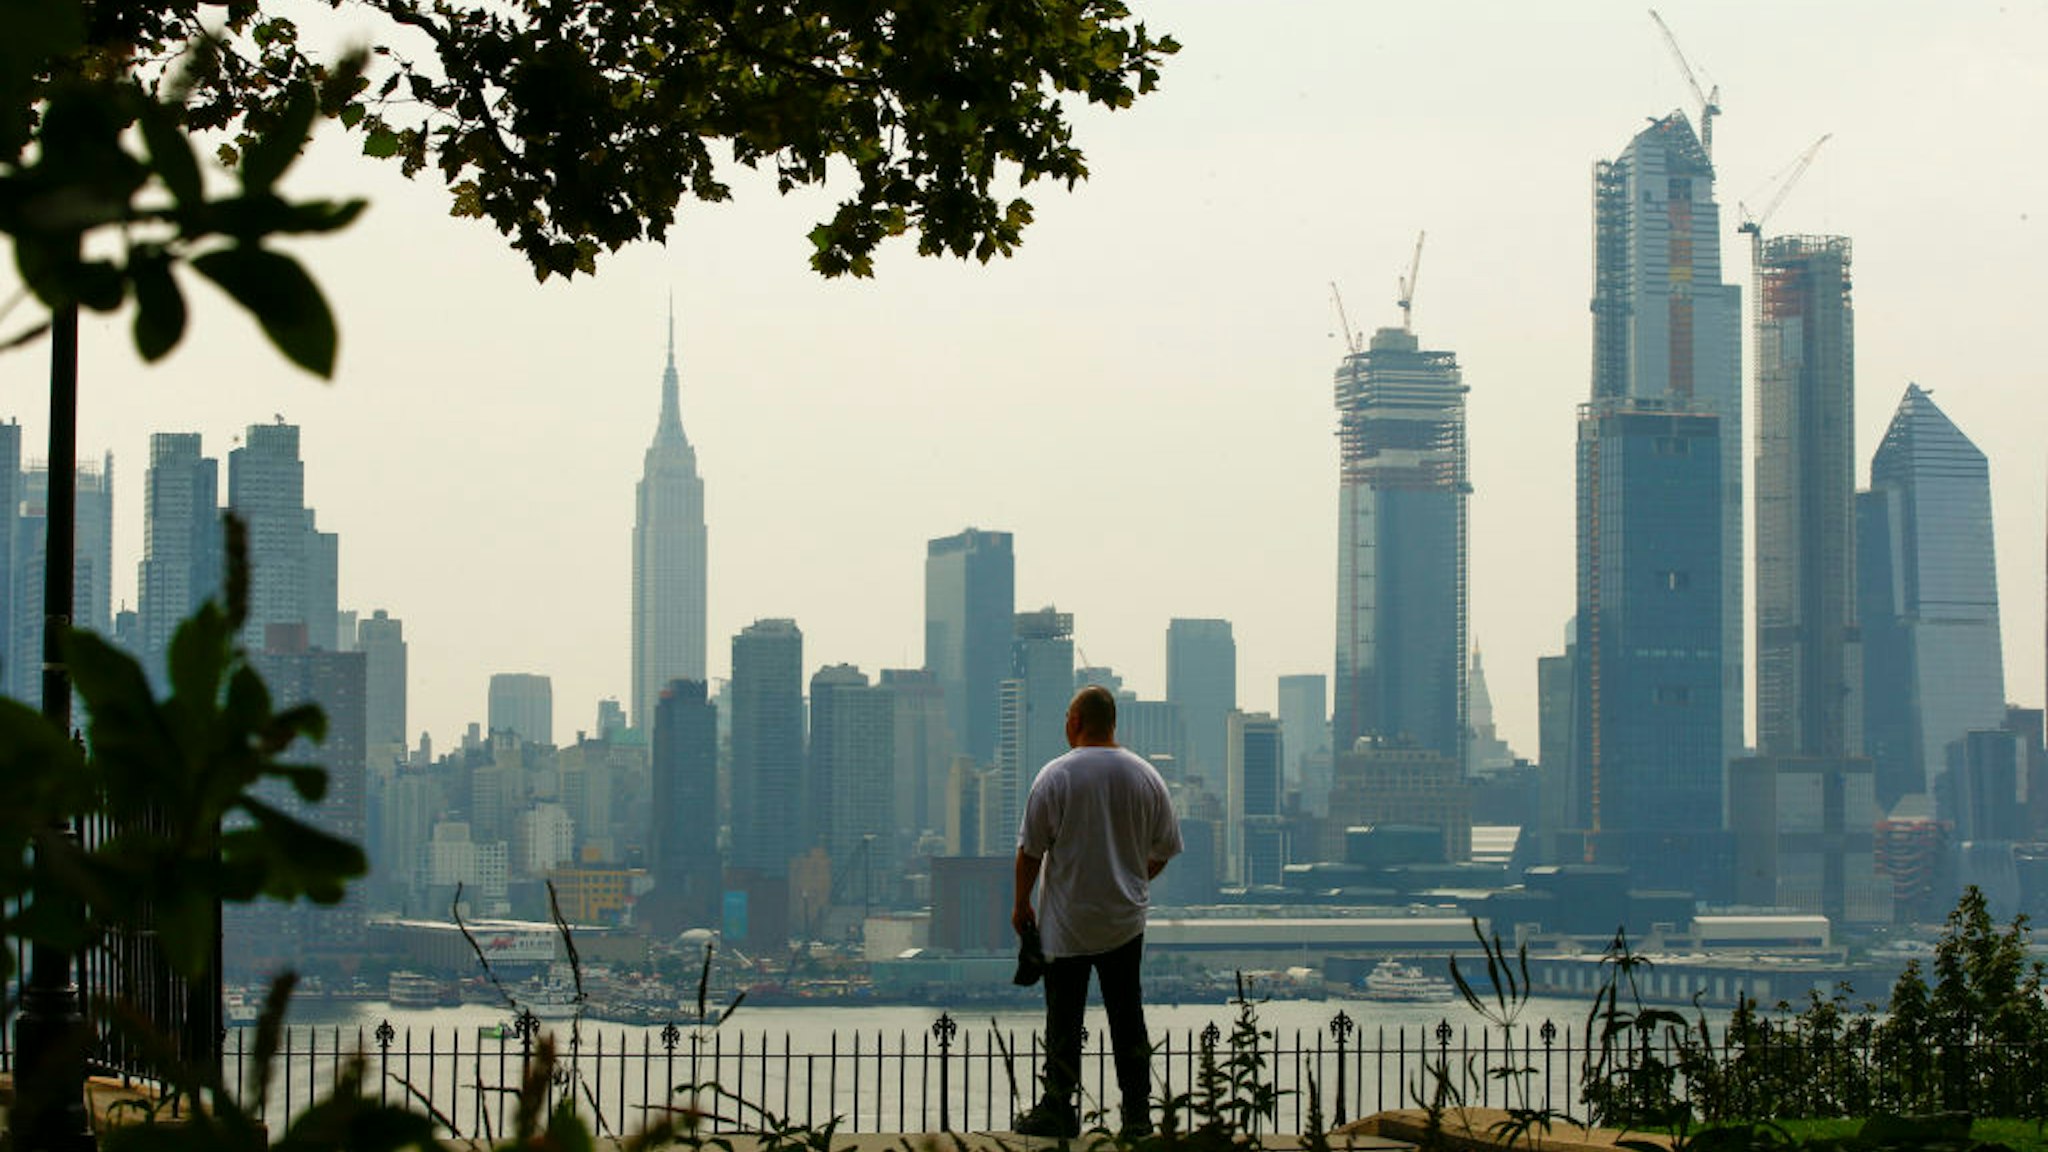 WEEHAWKEN, NJ - AUGUST 17: A man takes a look of the haze over the New York skyline and Empire State Building on August 17, 2018 in Weehawken, New Jersey. Severe thunderstorms and even an isolated tornado could strike New York City on Friday. (Photo by Eduardo Munoz Alvarez/Getty Images